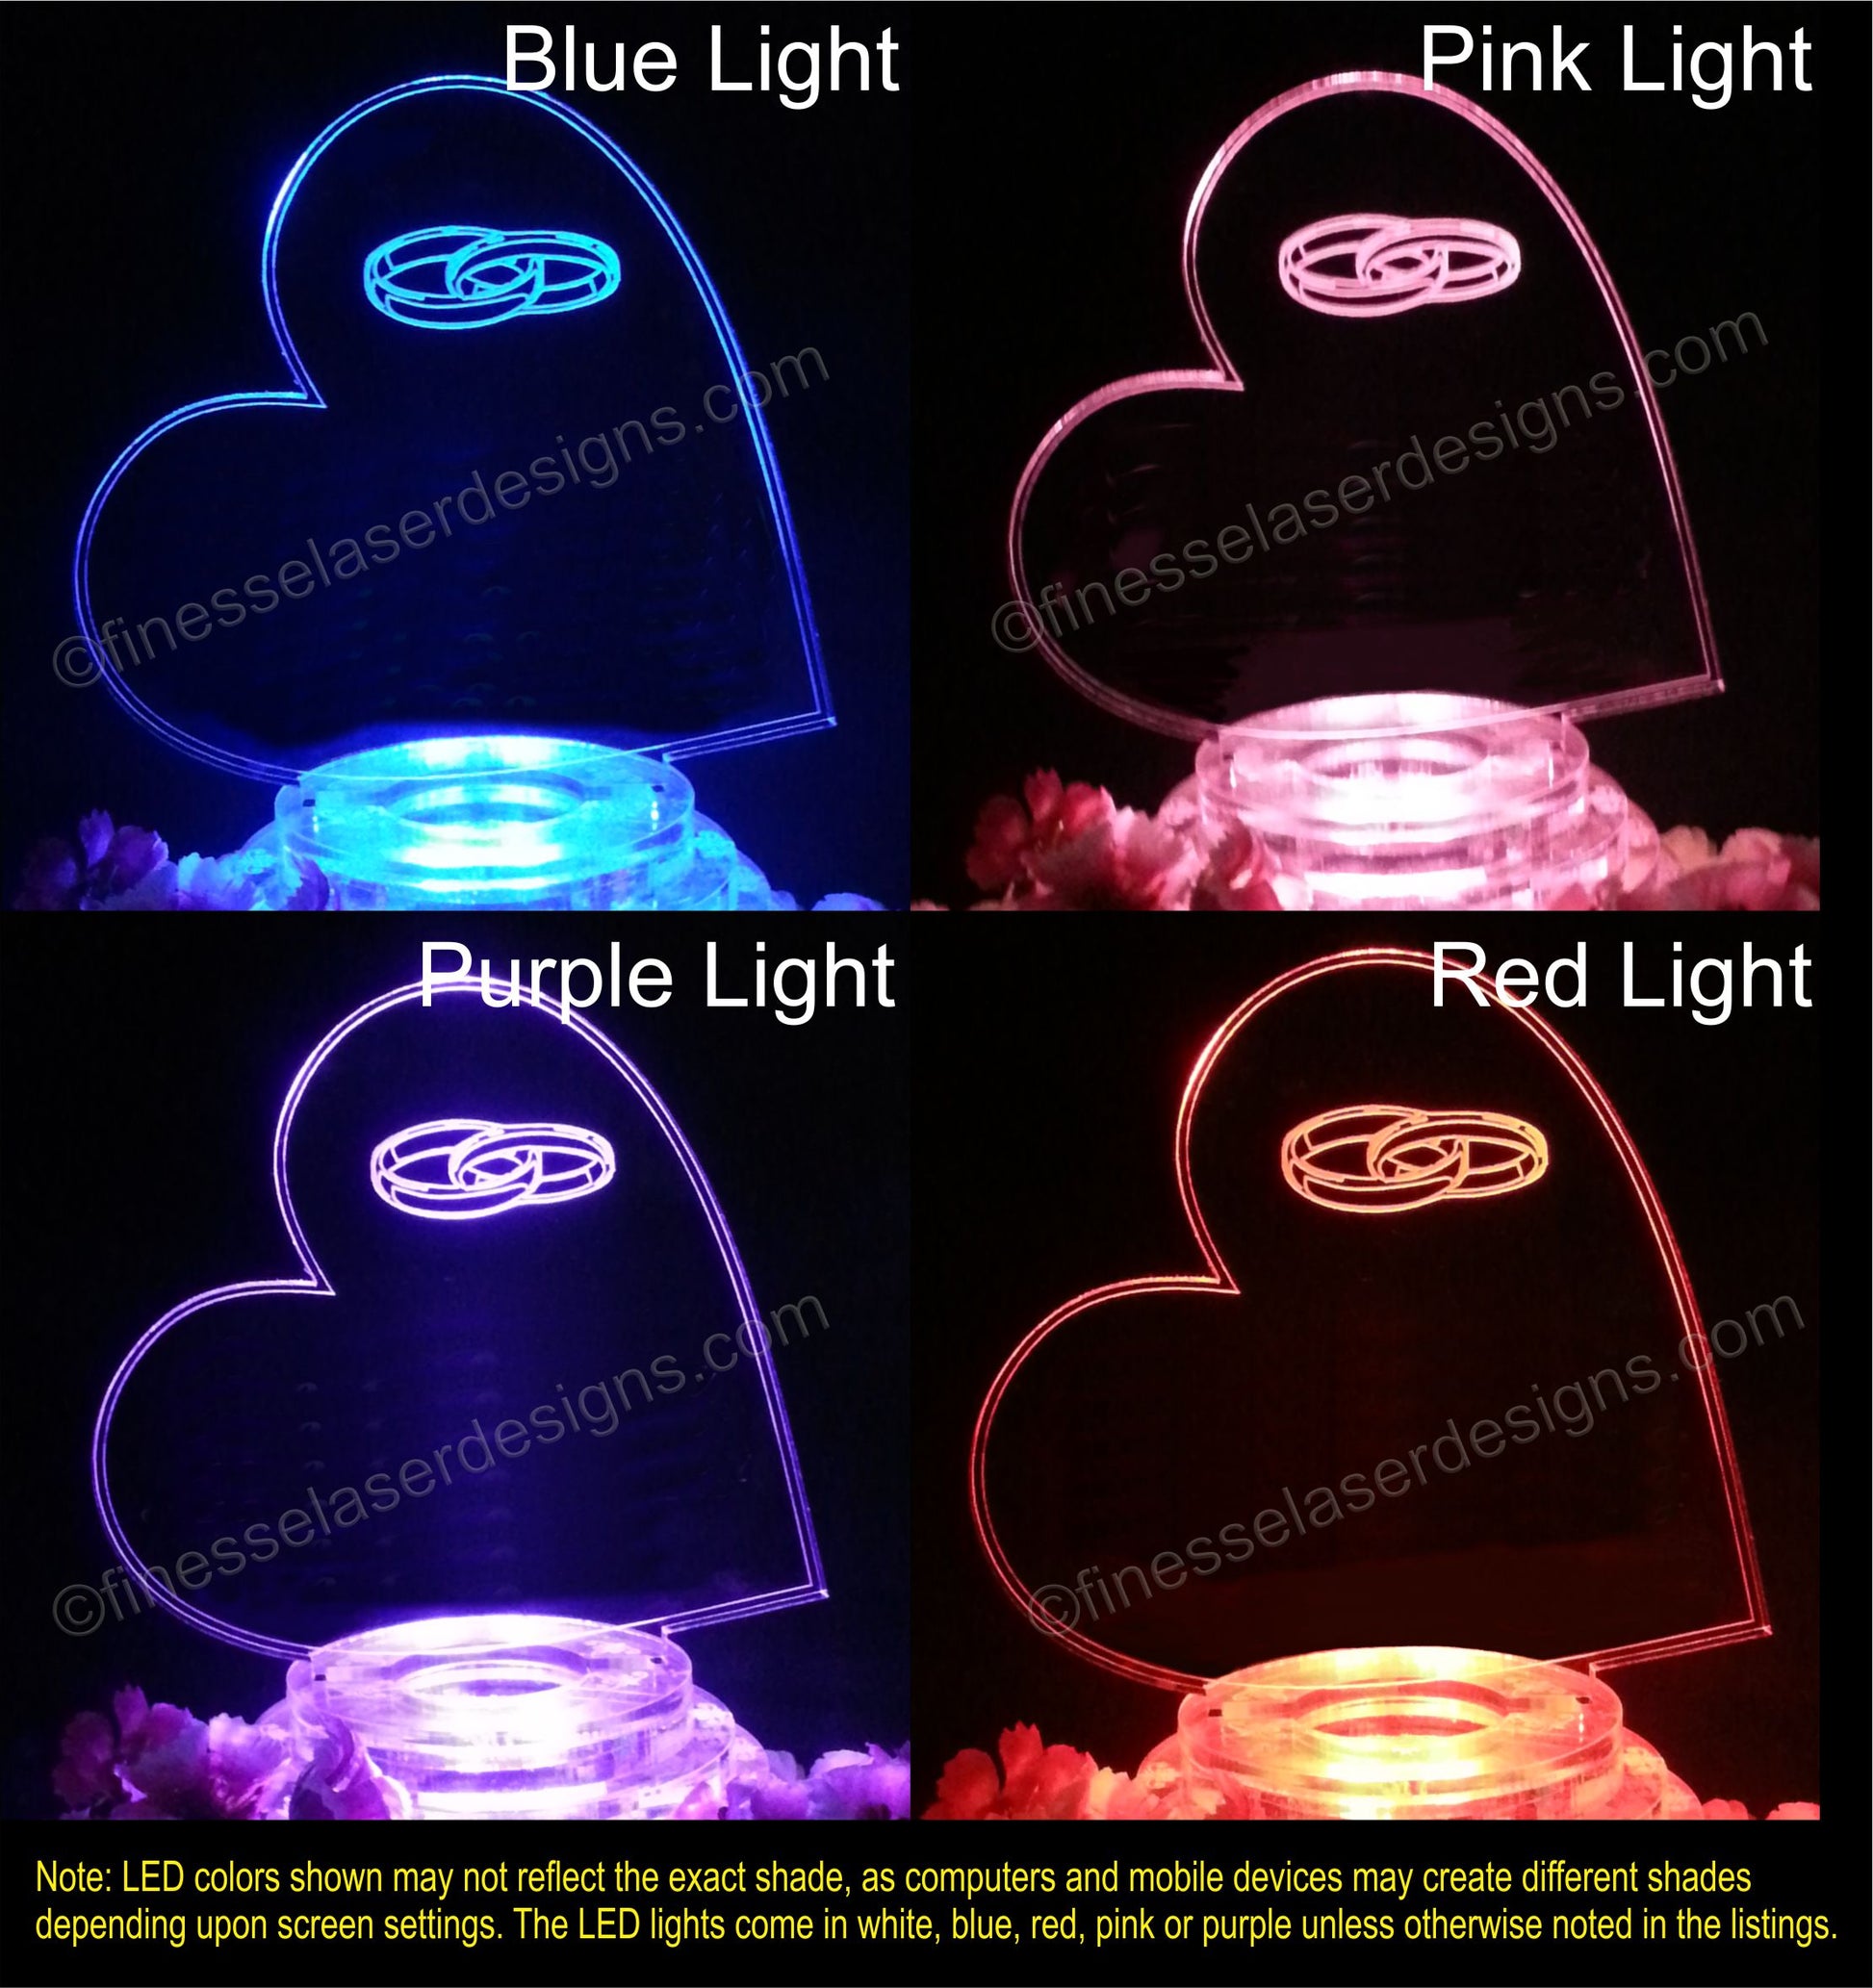 4 colored lighted views of an acrylic side heart shaped cake topper, shown in blue, pink, purple and red lighting